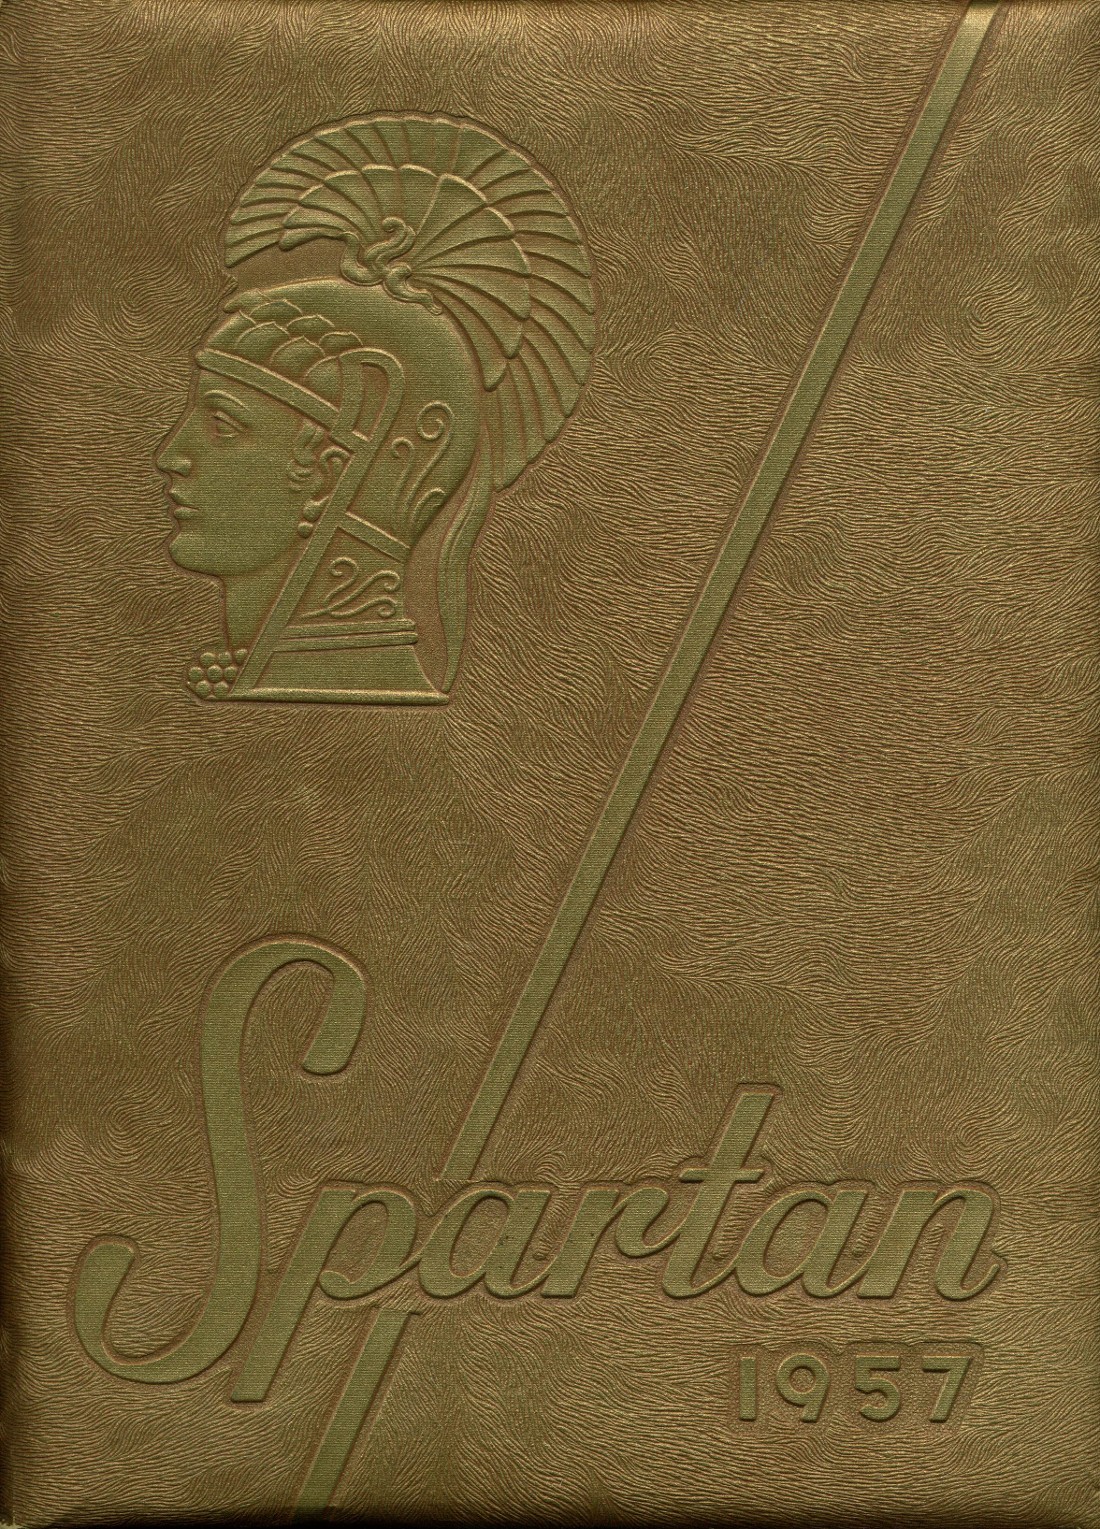 1957 yearbook from Spearfish High School from Spearfish, South Dakota